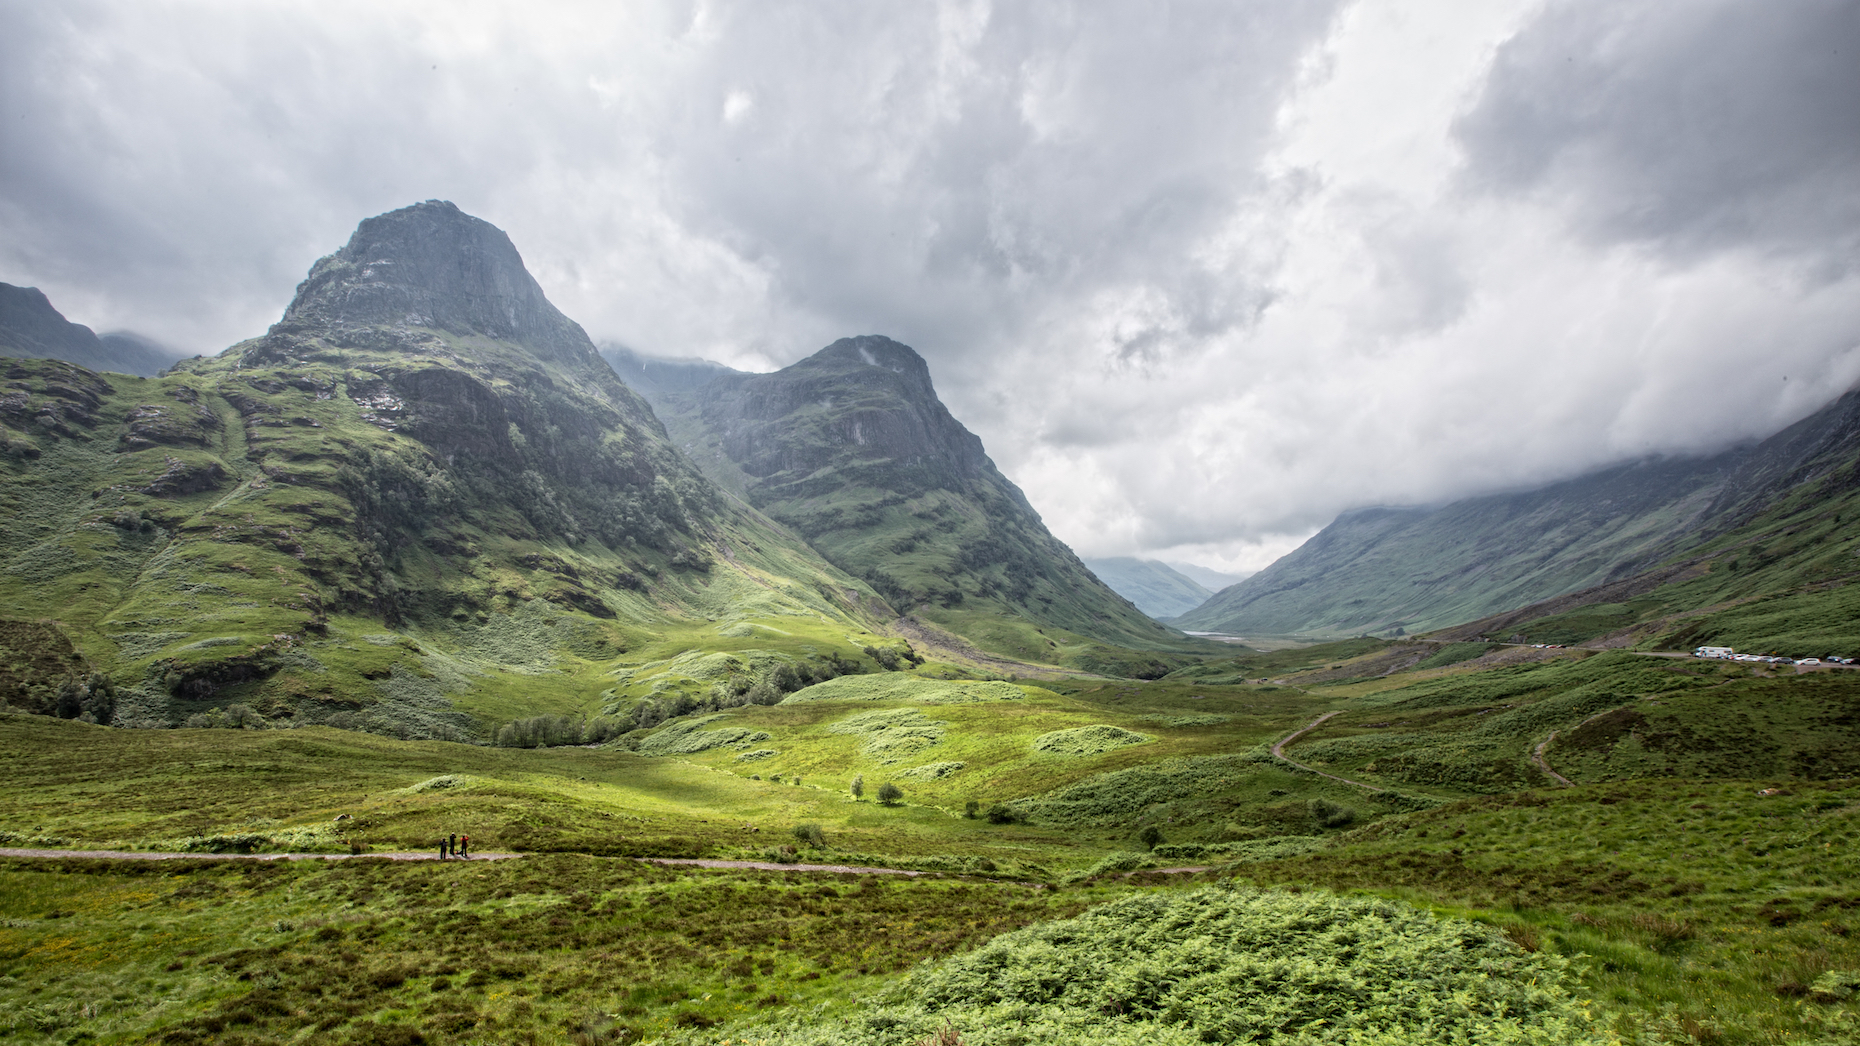 <a href="https://www.visitscotland.com/places-to-go/glencoe" rel="noreferrer noopener">Glencoe’s lush valleys</a> will surely amaze you, while also revealing more about Scotland’s tumultuous history. Famous for its scenic beauty, Glencoe is also known for the MacDonald clan massacre of 1692. While some believe the place is haunted, its mountains and invigoratingly fresh air manifest an undeniable Zen. The popular An Torr and Glencoe Lochan trails make it a must stop for hikers as well.